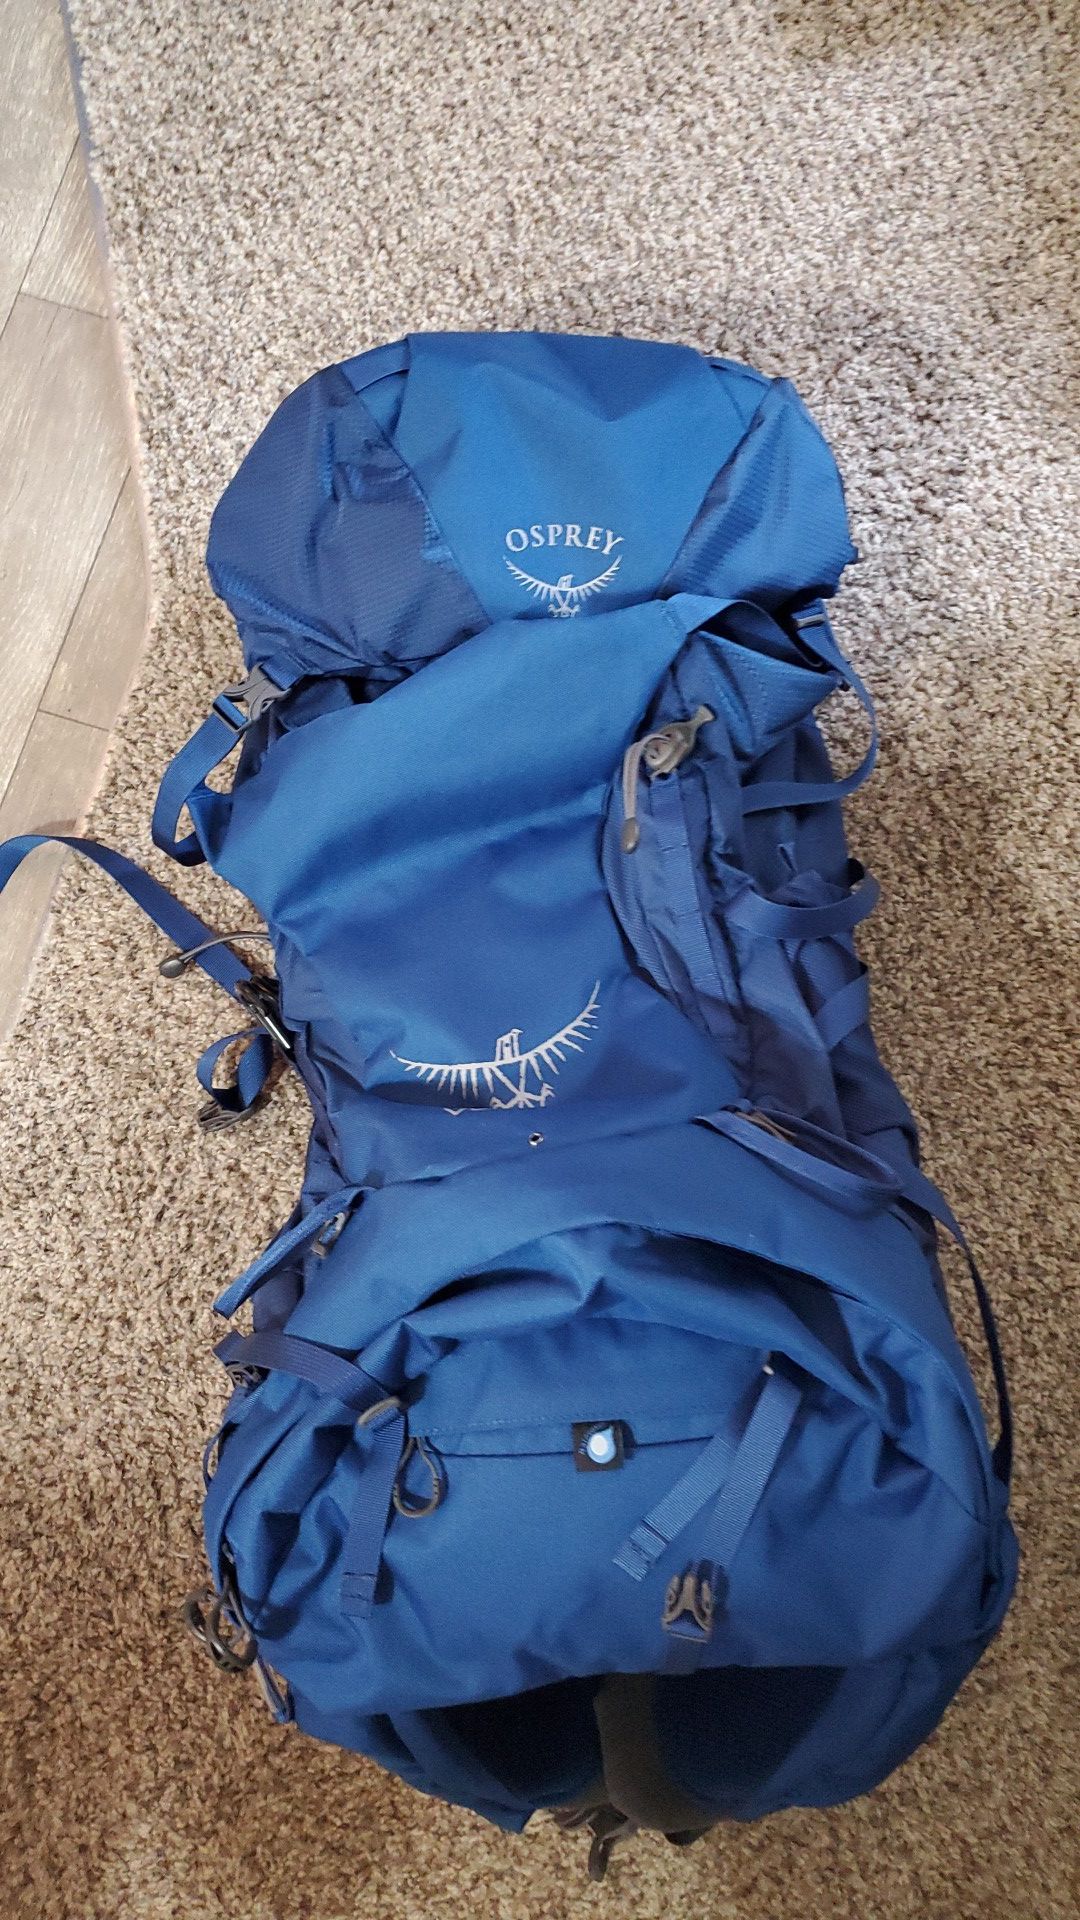 Osprey Volt 60 Backpacking Bag Only Used Once Great Condition